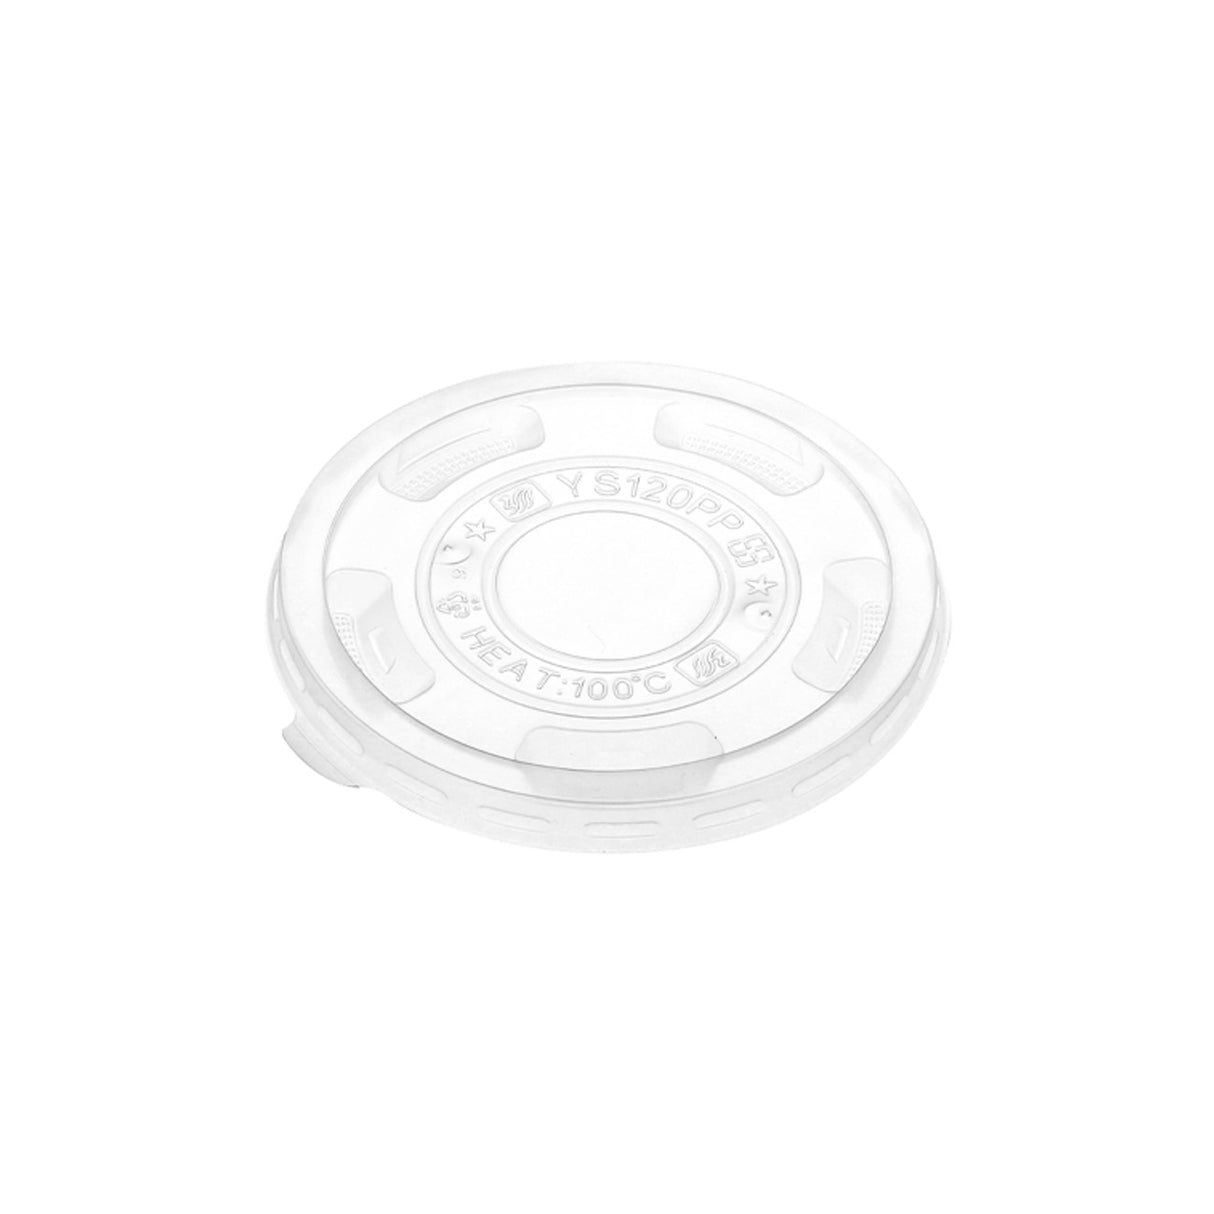 YS120 | 120mm Clear PP Round Lids (Lid Only) - 1000 Pcs